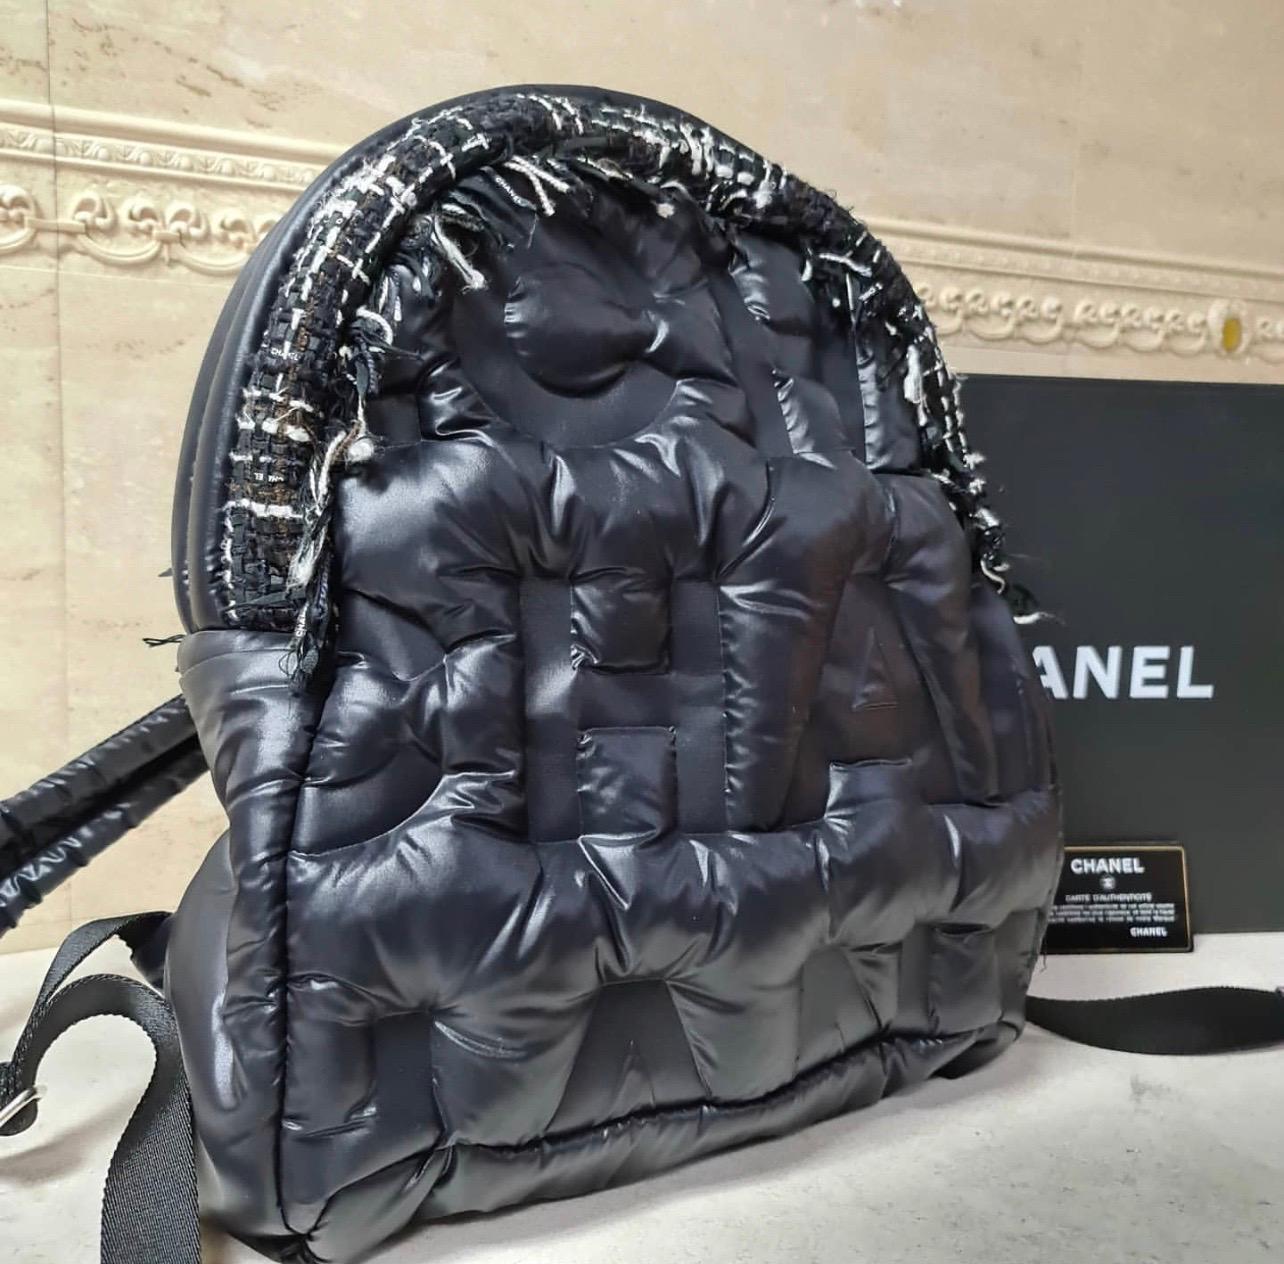 Chanel Doudoune Backpack Embossed Nylon with Tweed Medium
This Chanel Doudoune Backpack Embossed Nylon with Tweed Medium, crafted from black embossed nylon with tweed, features a top handle, adjustable shoulder straps, large embossed CHANEL letters,